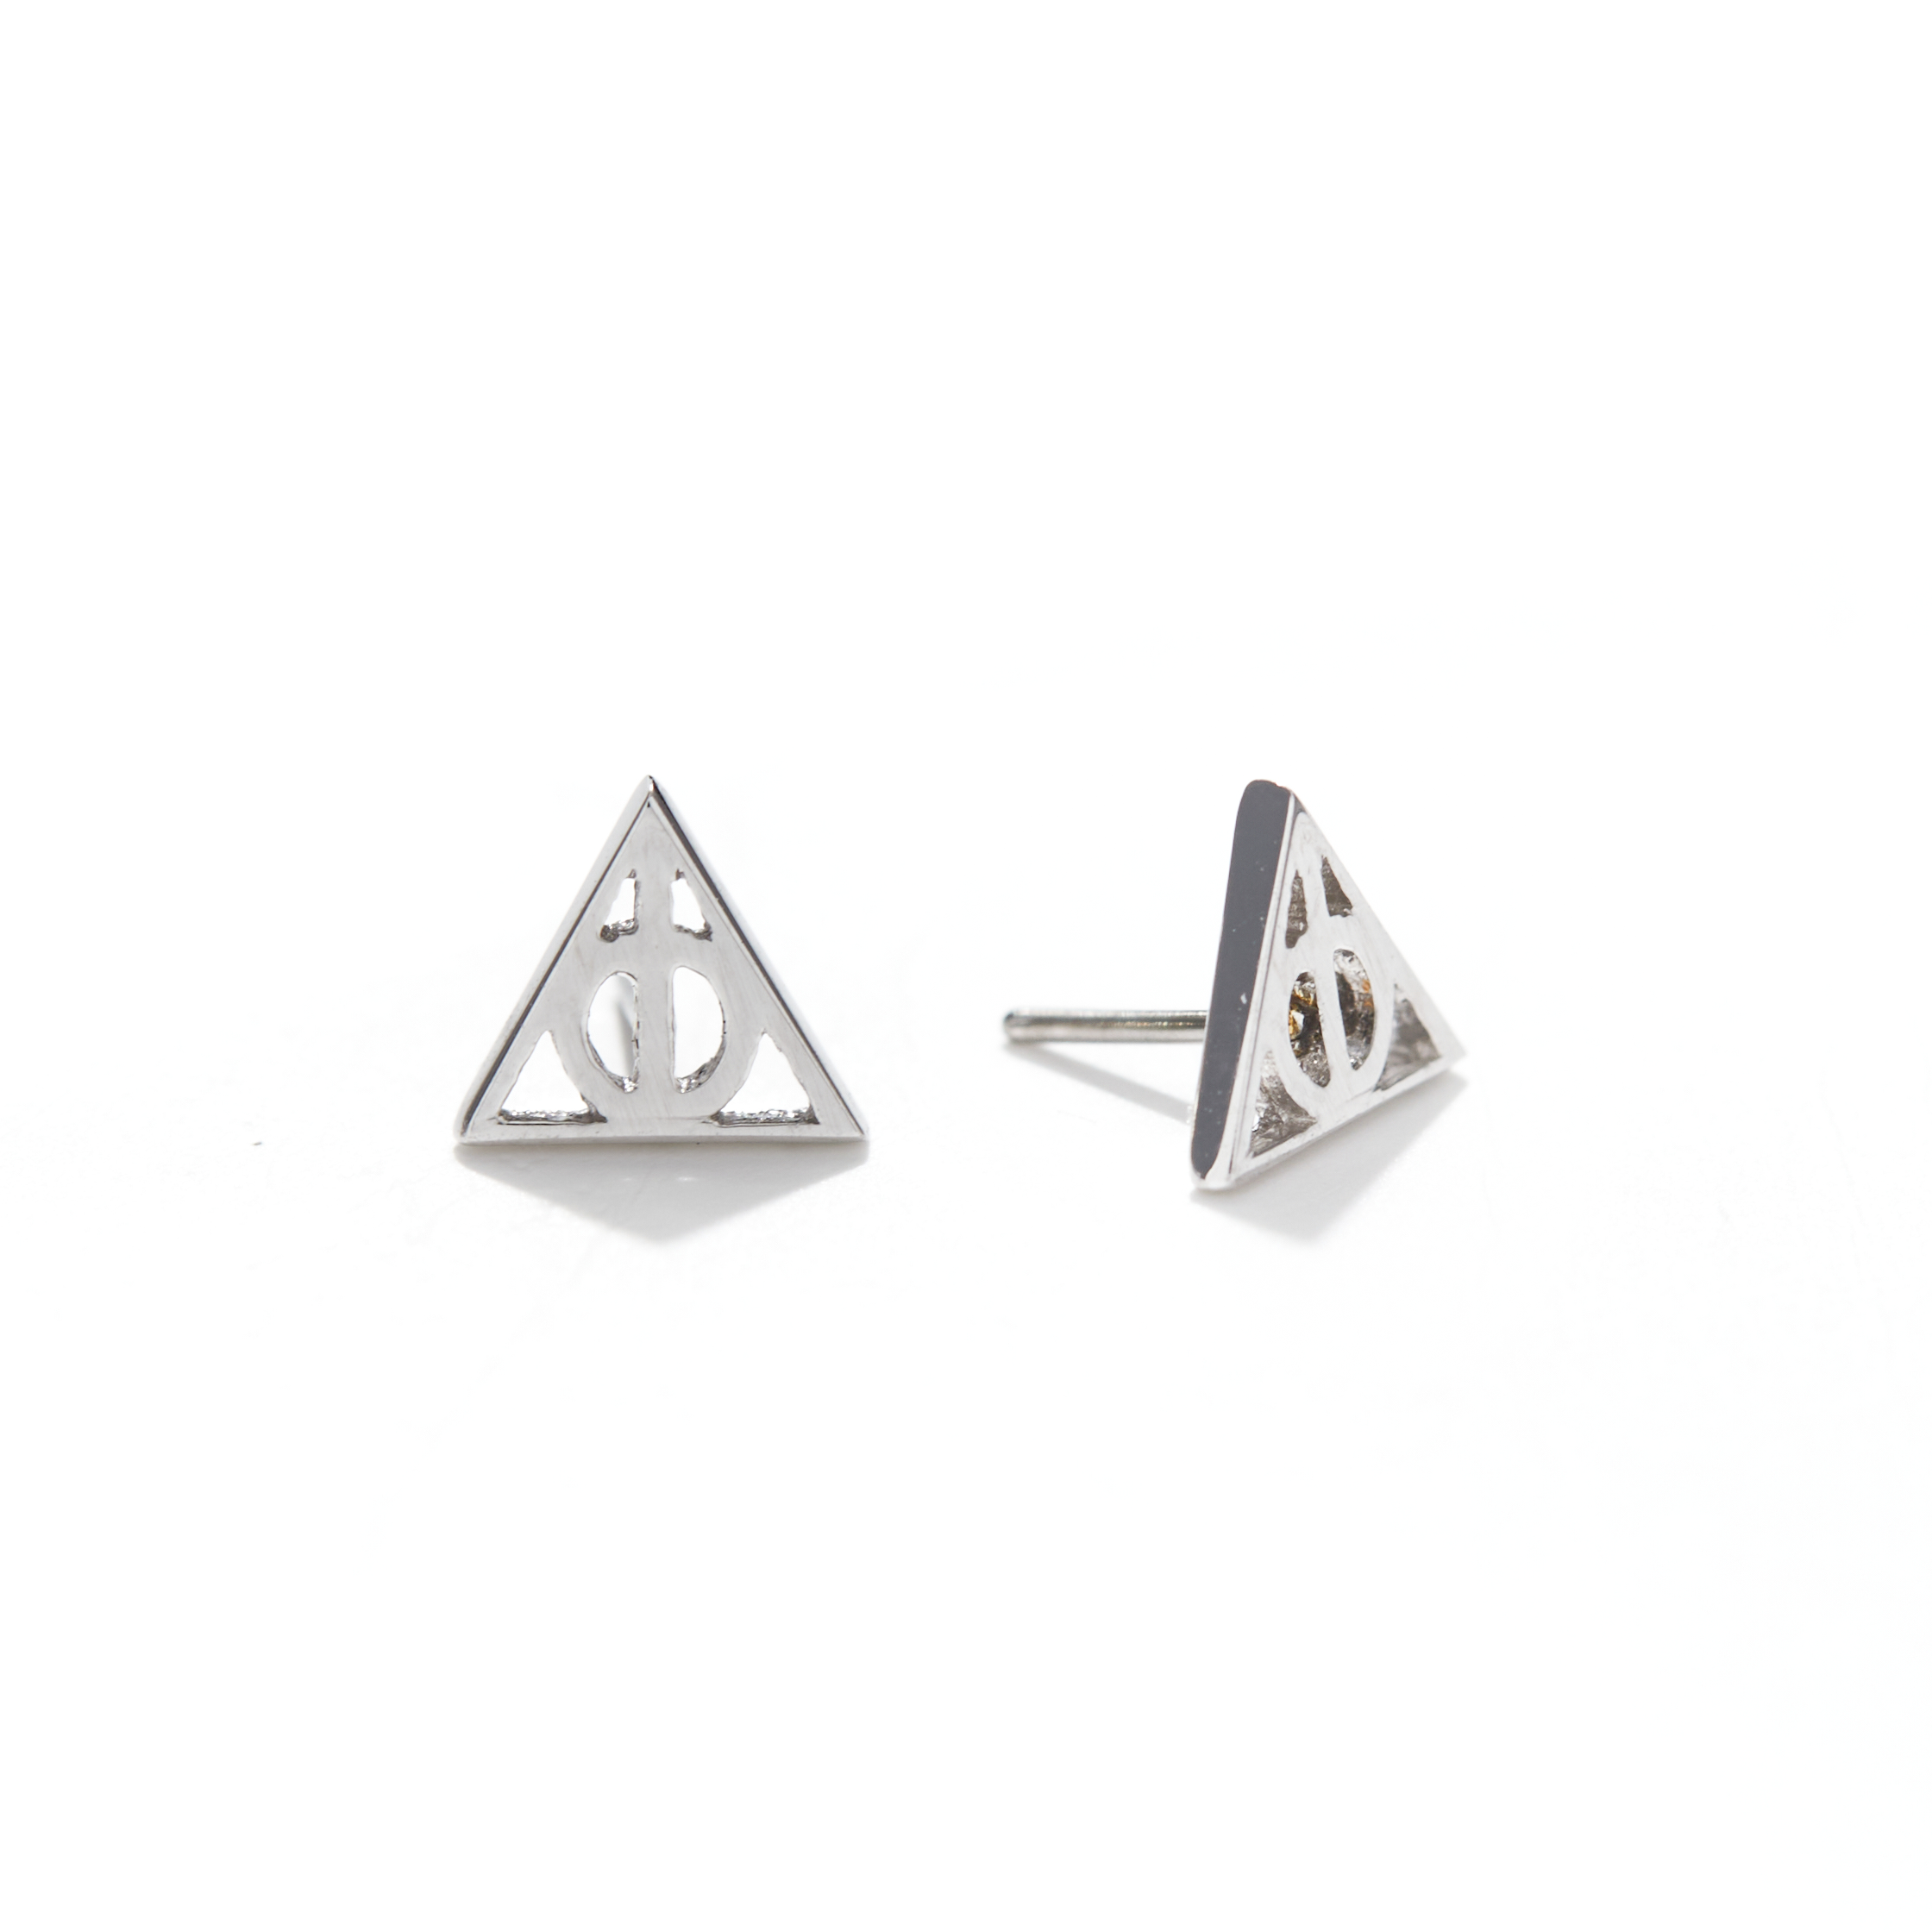 Gold Deathly Hallows